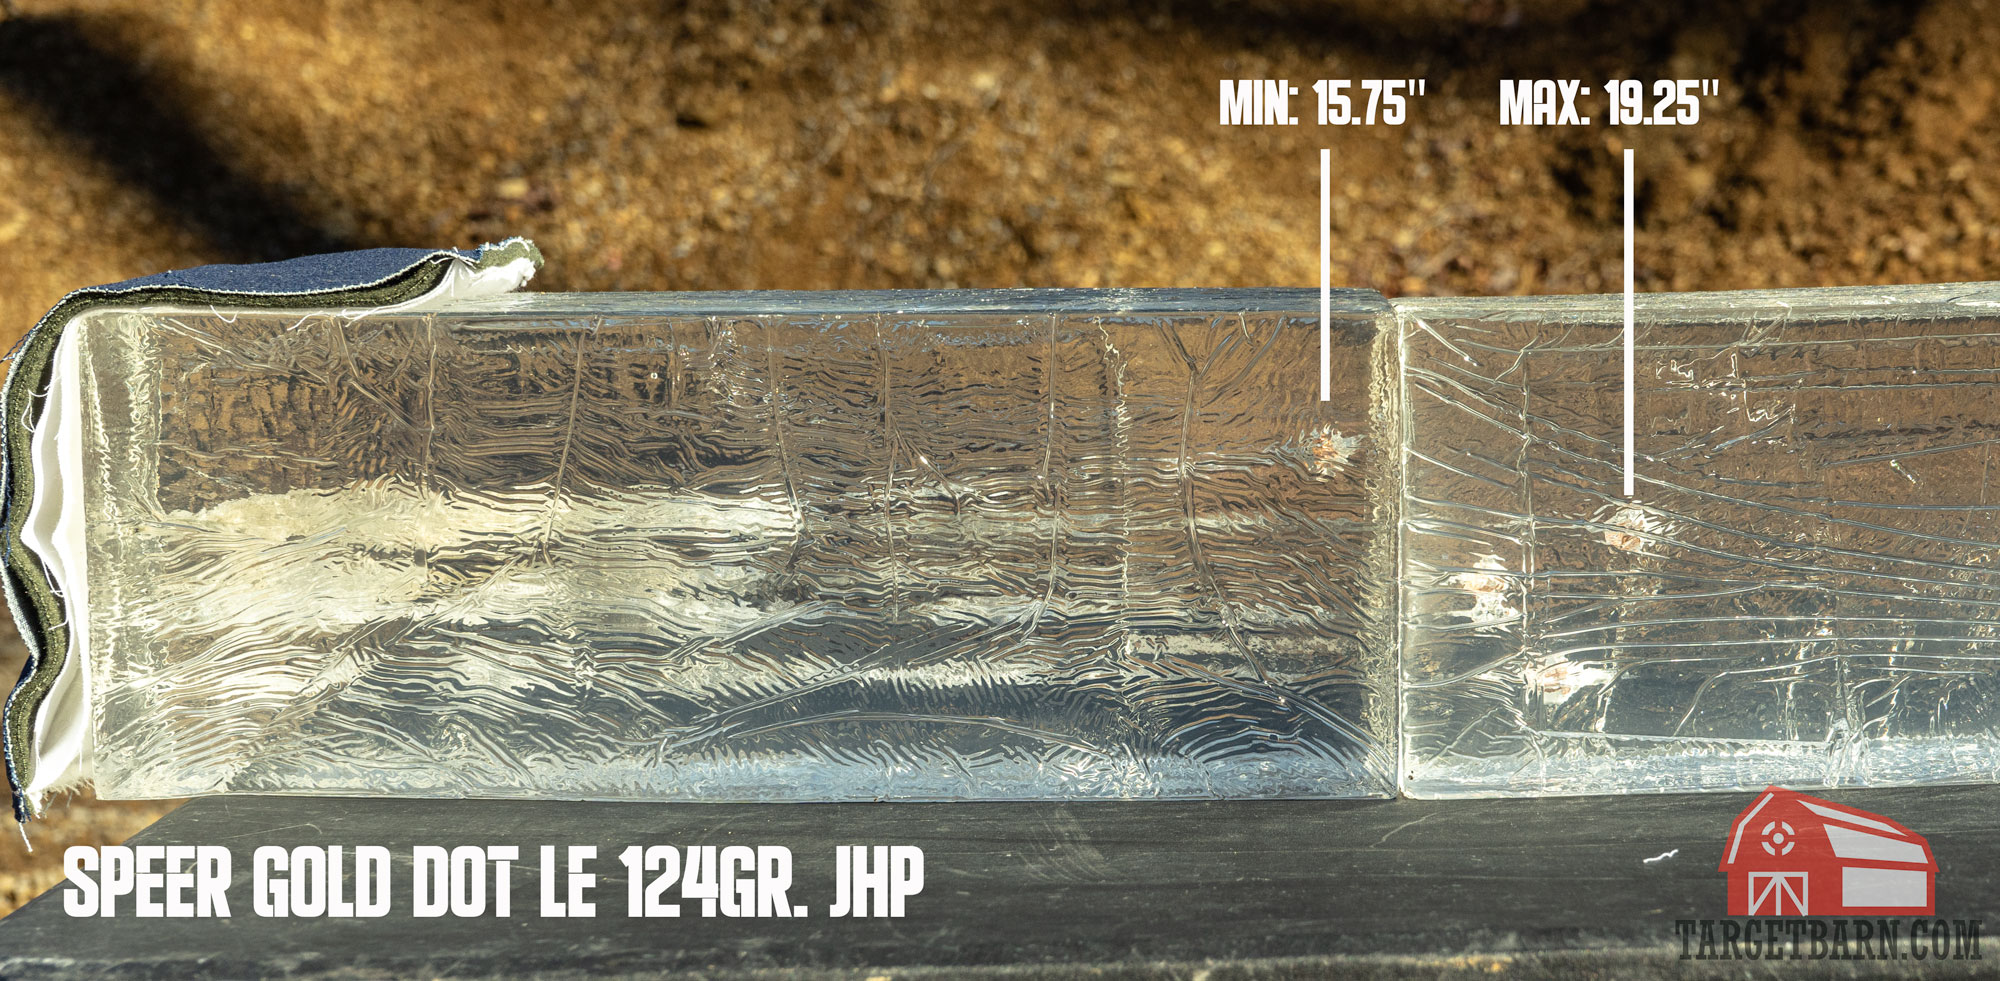 a ballistic gel block after gel testing 5 rounds of speer gold dot 124gr. le jhp with minimum and maximum penetration marked